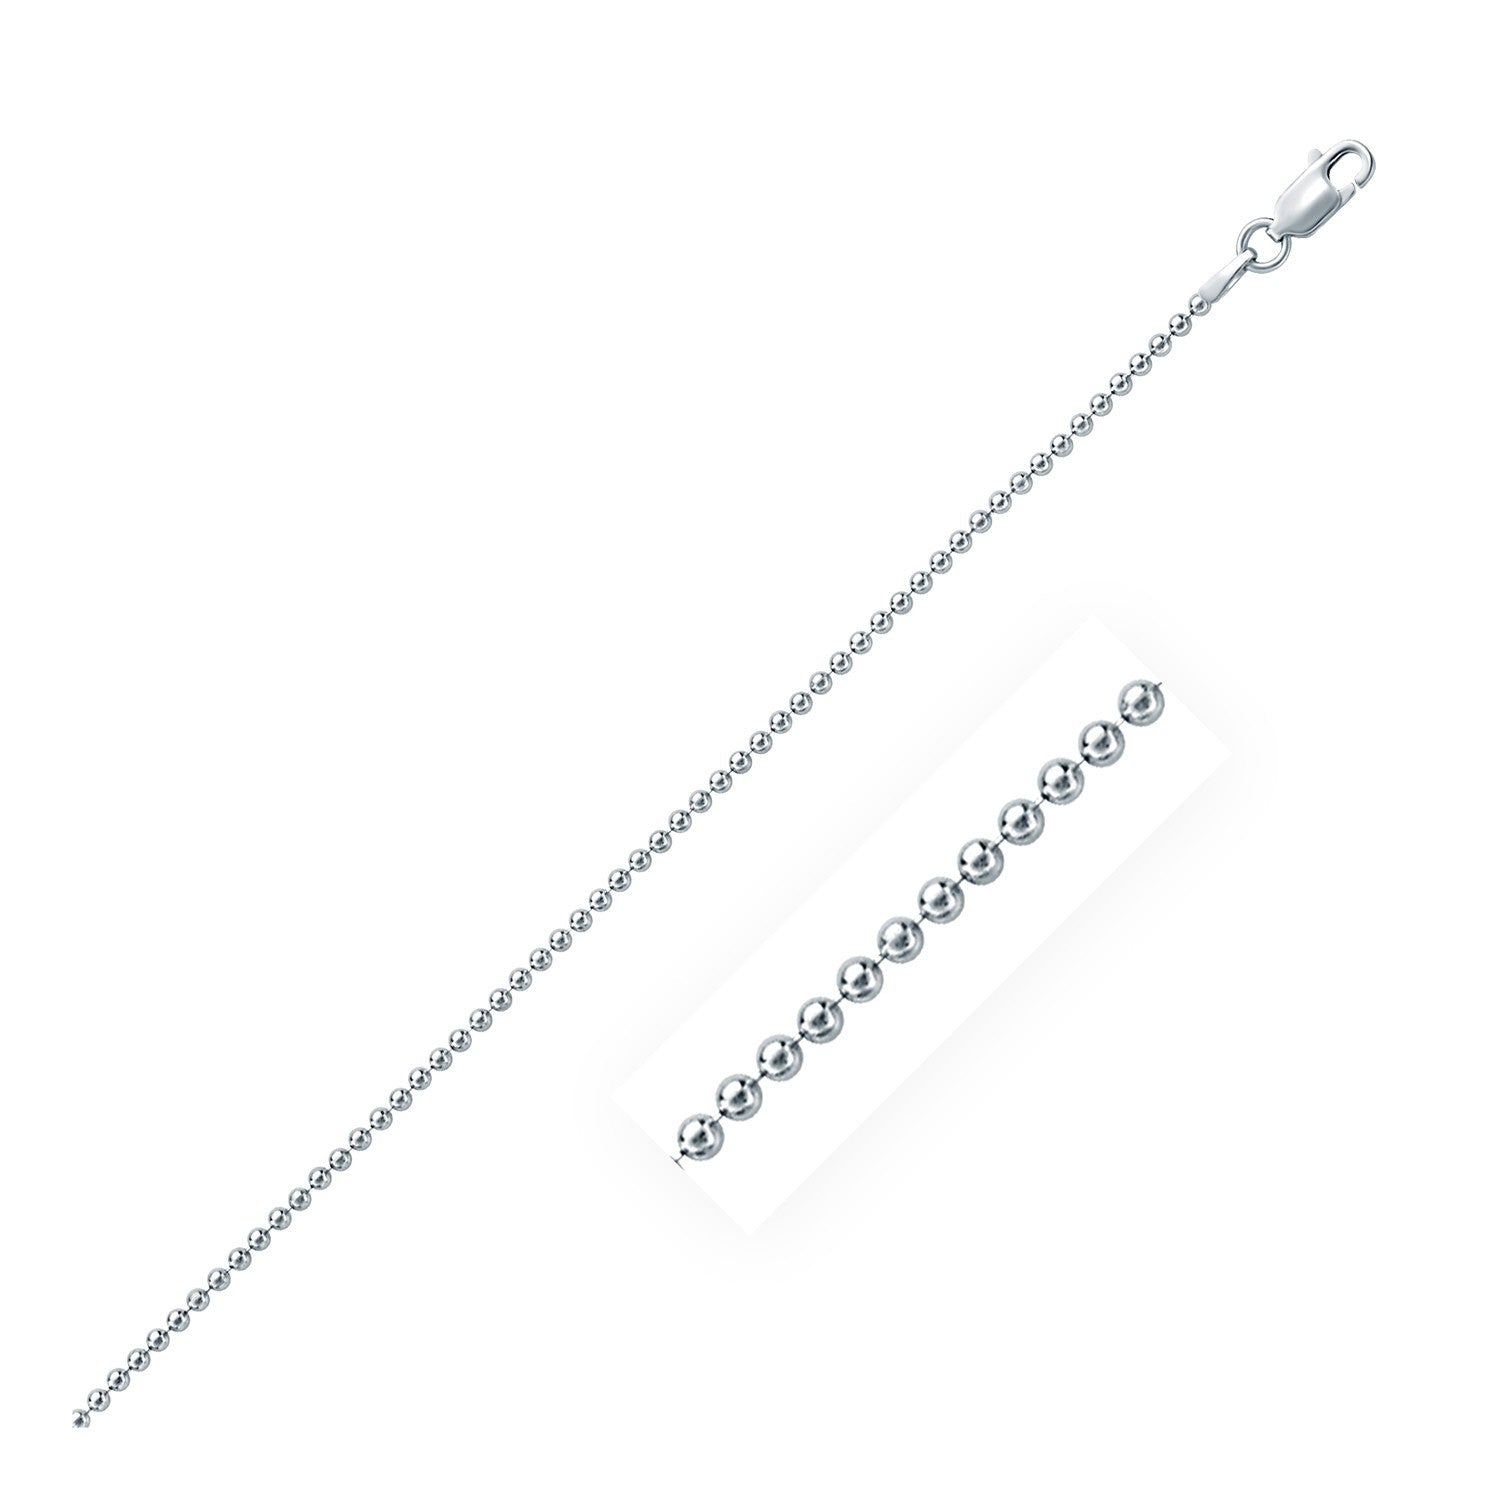 Rhodium Plated 1.8mm Sterling Silver Bead Style Chain, size 18''